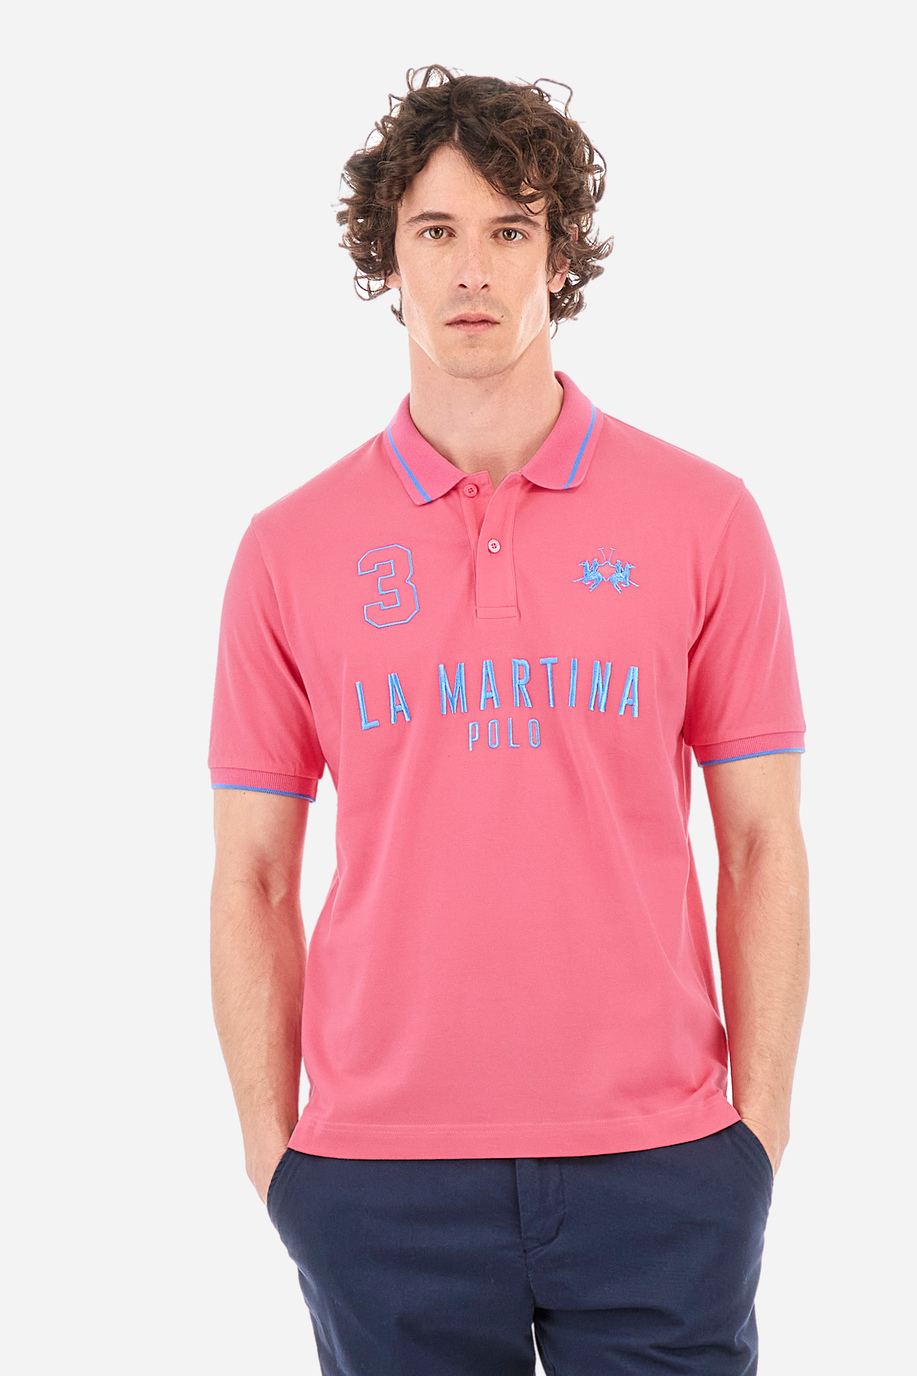 Regular-fit polo shirt in elasticated cotton - Yeshayahu - XLarge sizes | La Martina - Official Online Shop